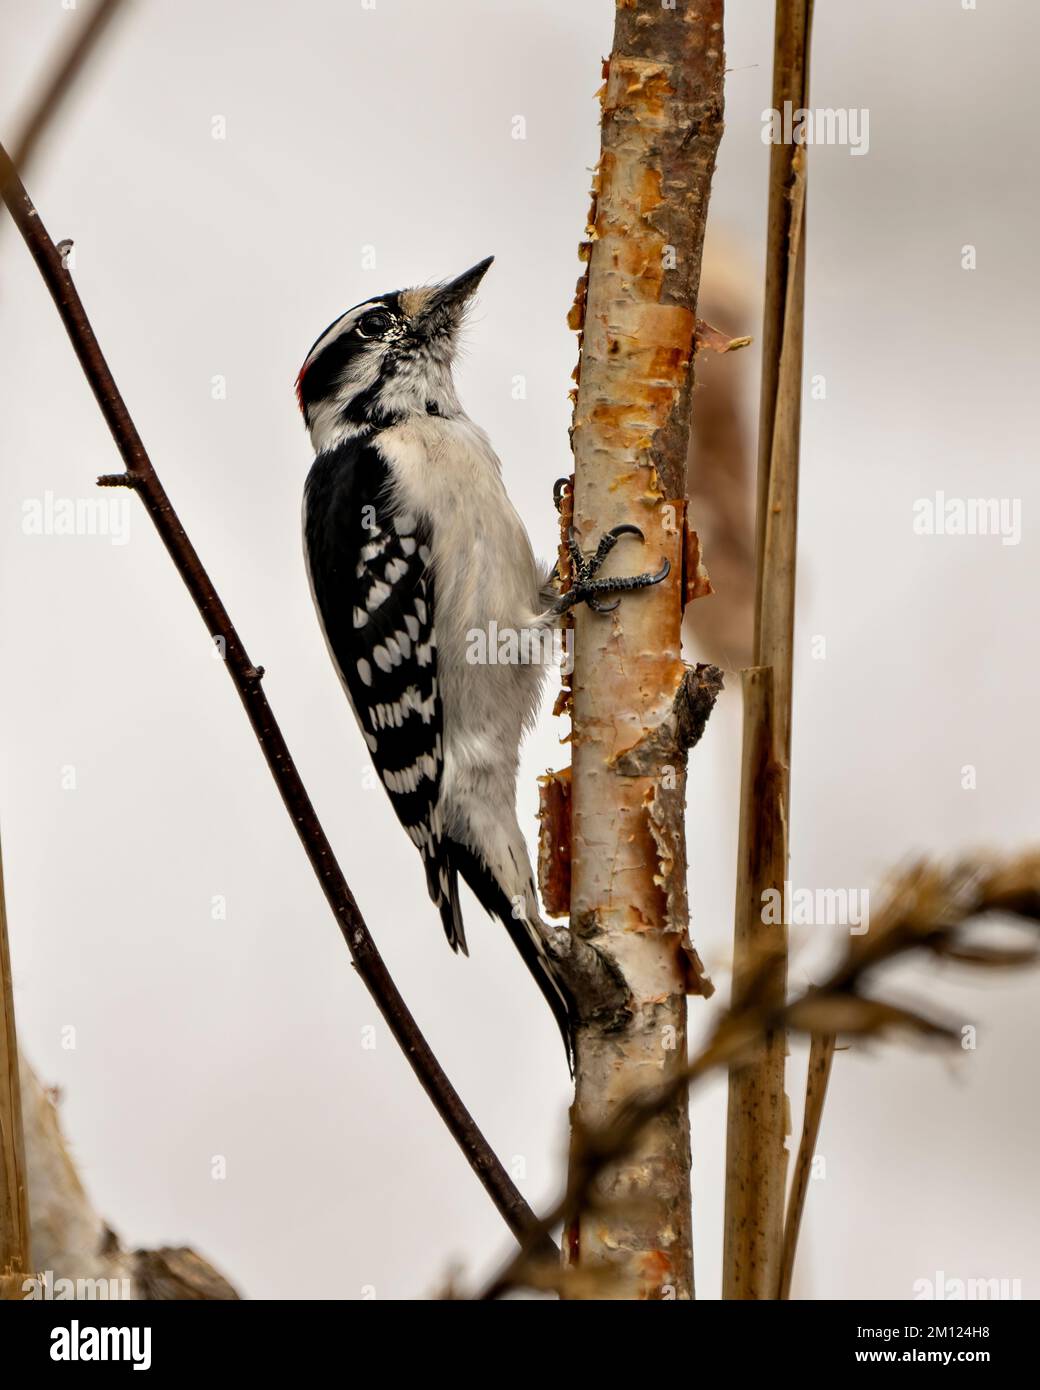 Woodpecker Downy male on a birch branch with a blur white background in its environment and habitat surrounding displaying white and black feather. Stock Photo